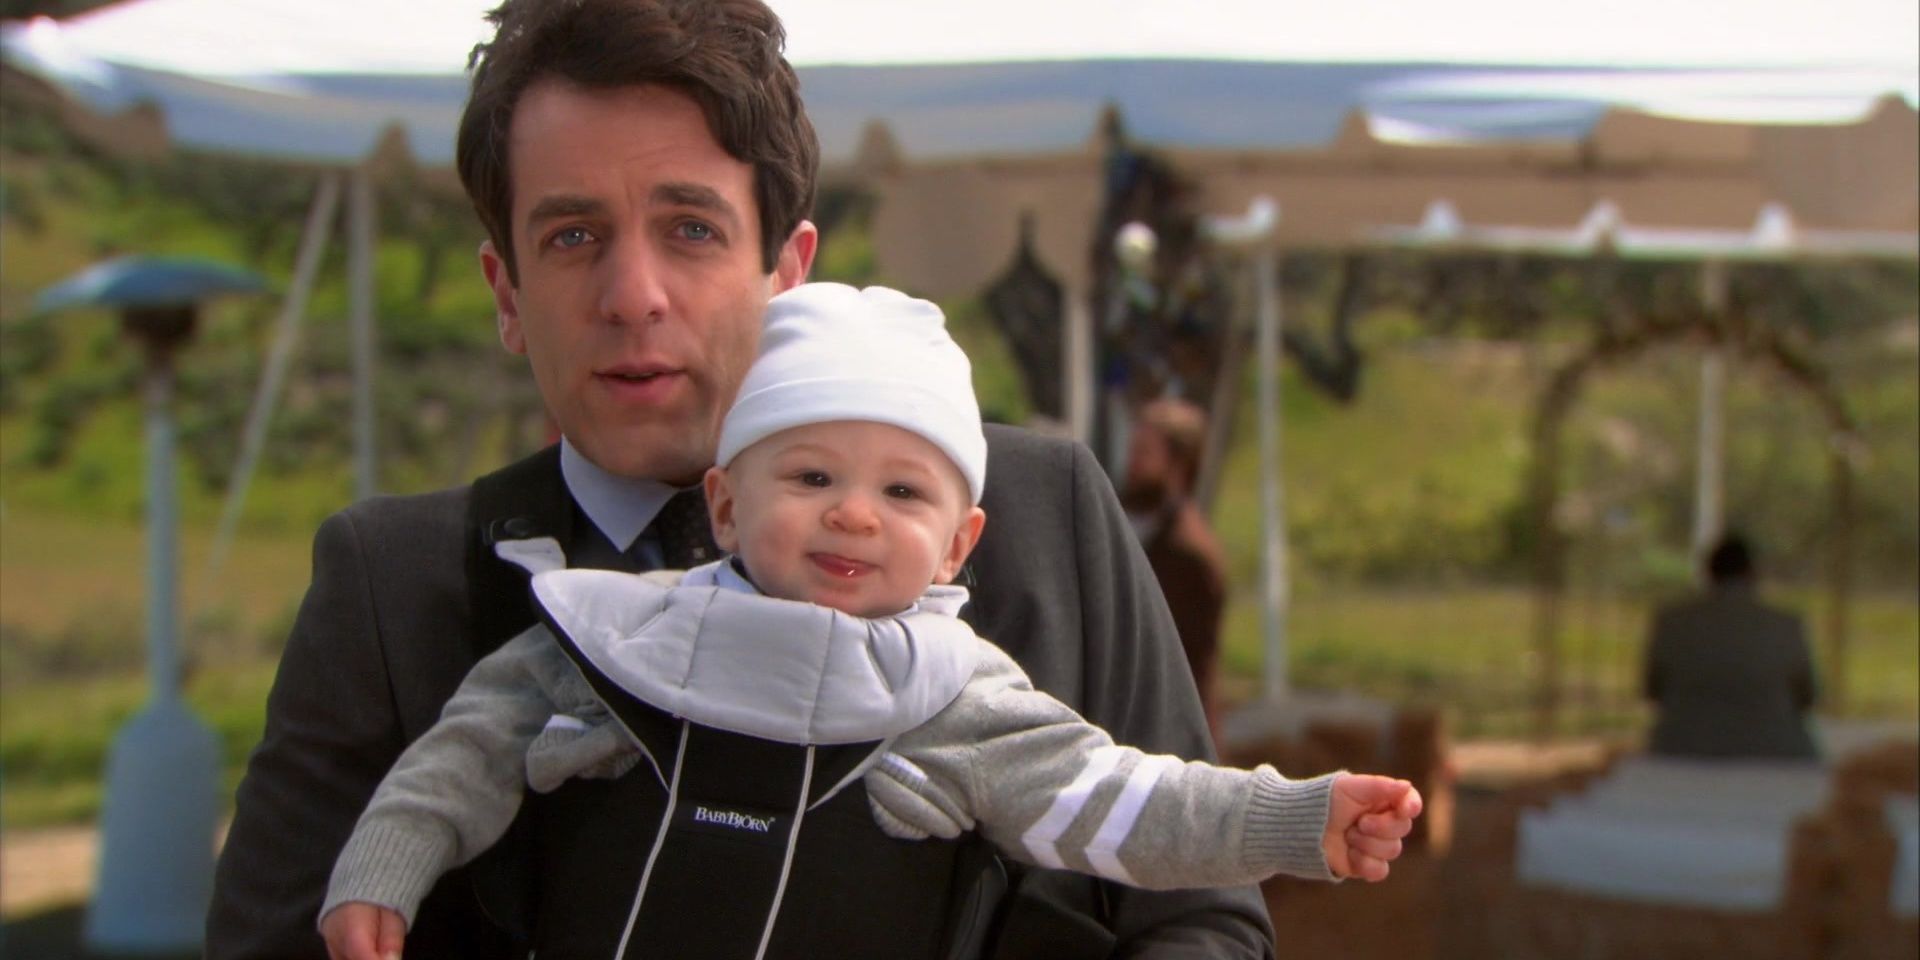 BABYBJORN Baby Carrier Used by B. J. Novak Ryan Howard in The Office 3 Cropped